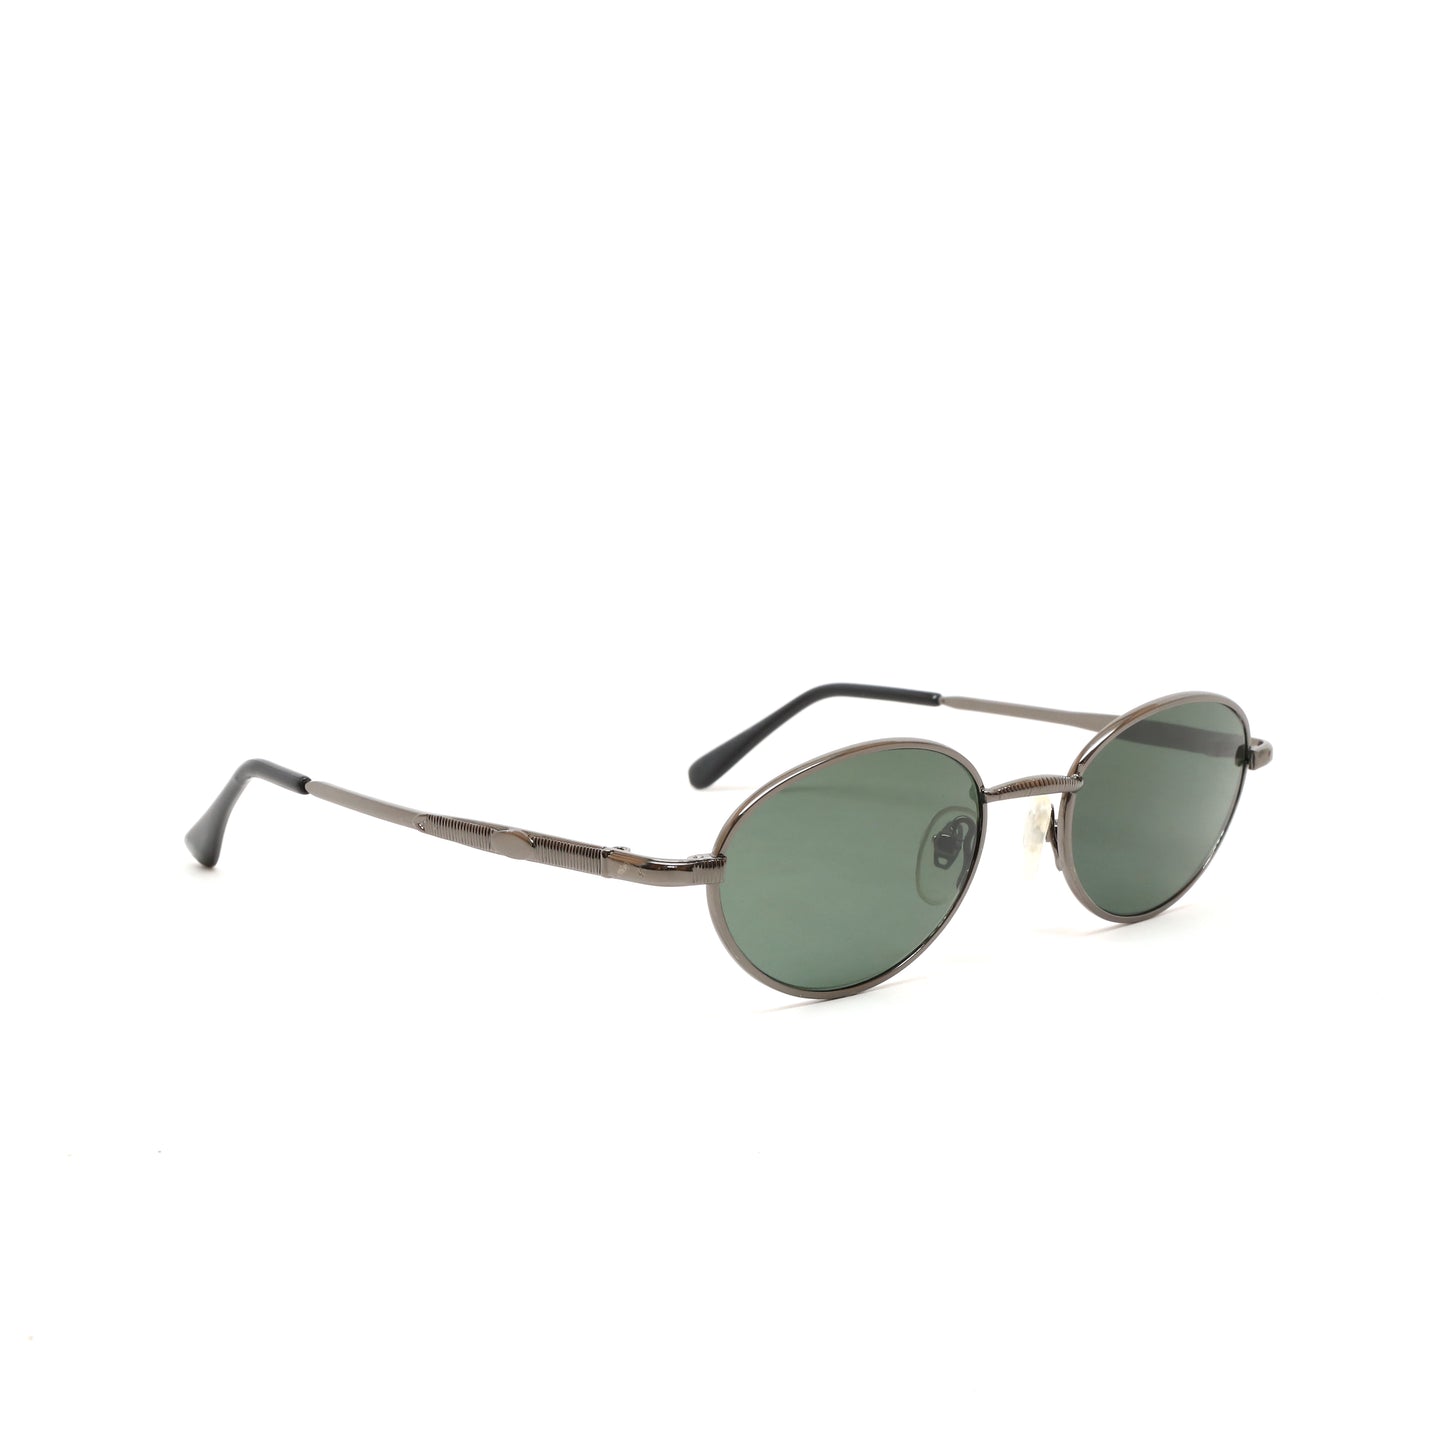 Vintage 1998 Downward Angled Wire Oval Shaped Sunglasses - Grey